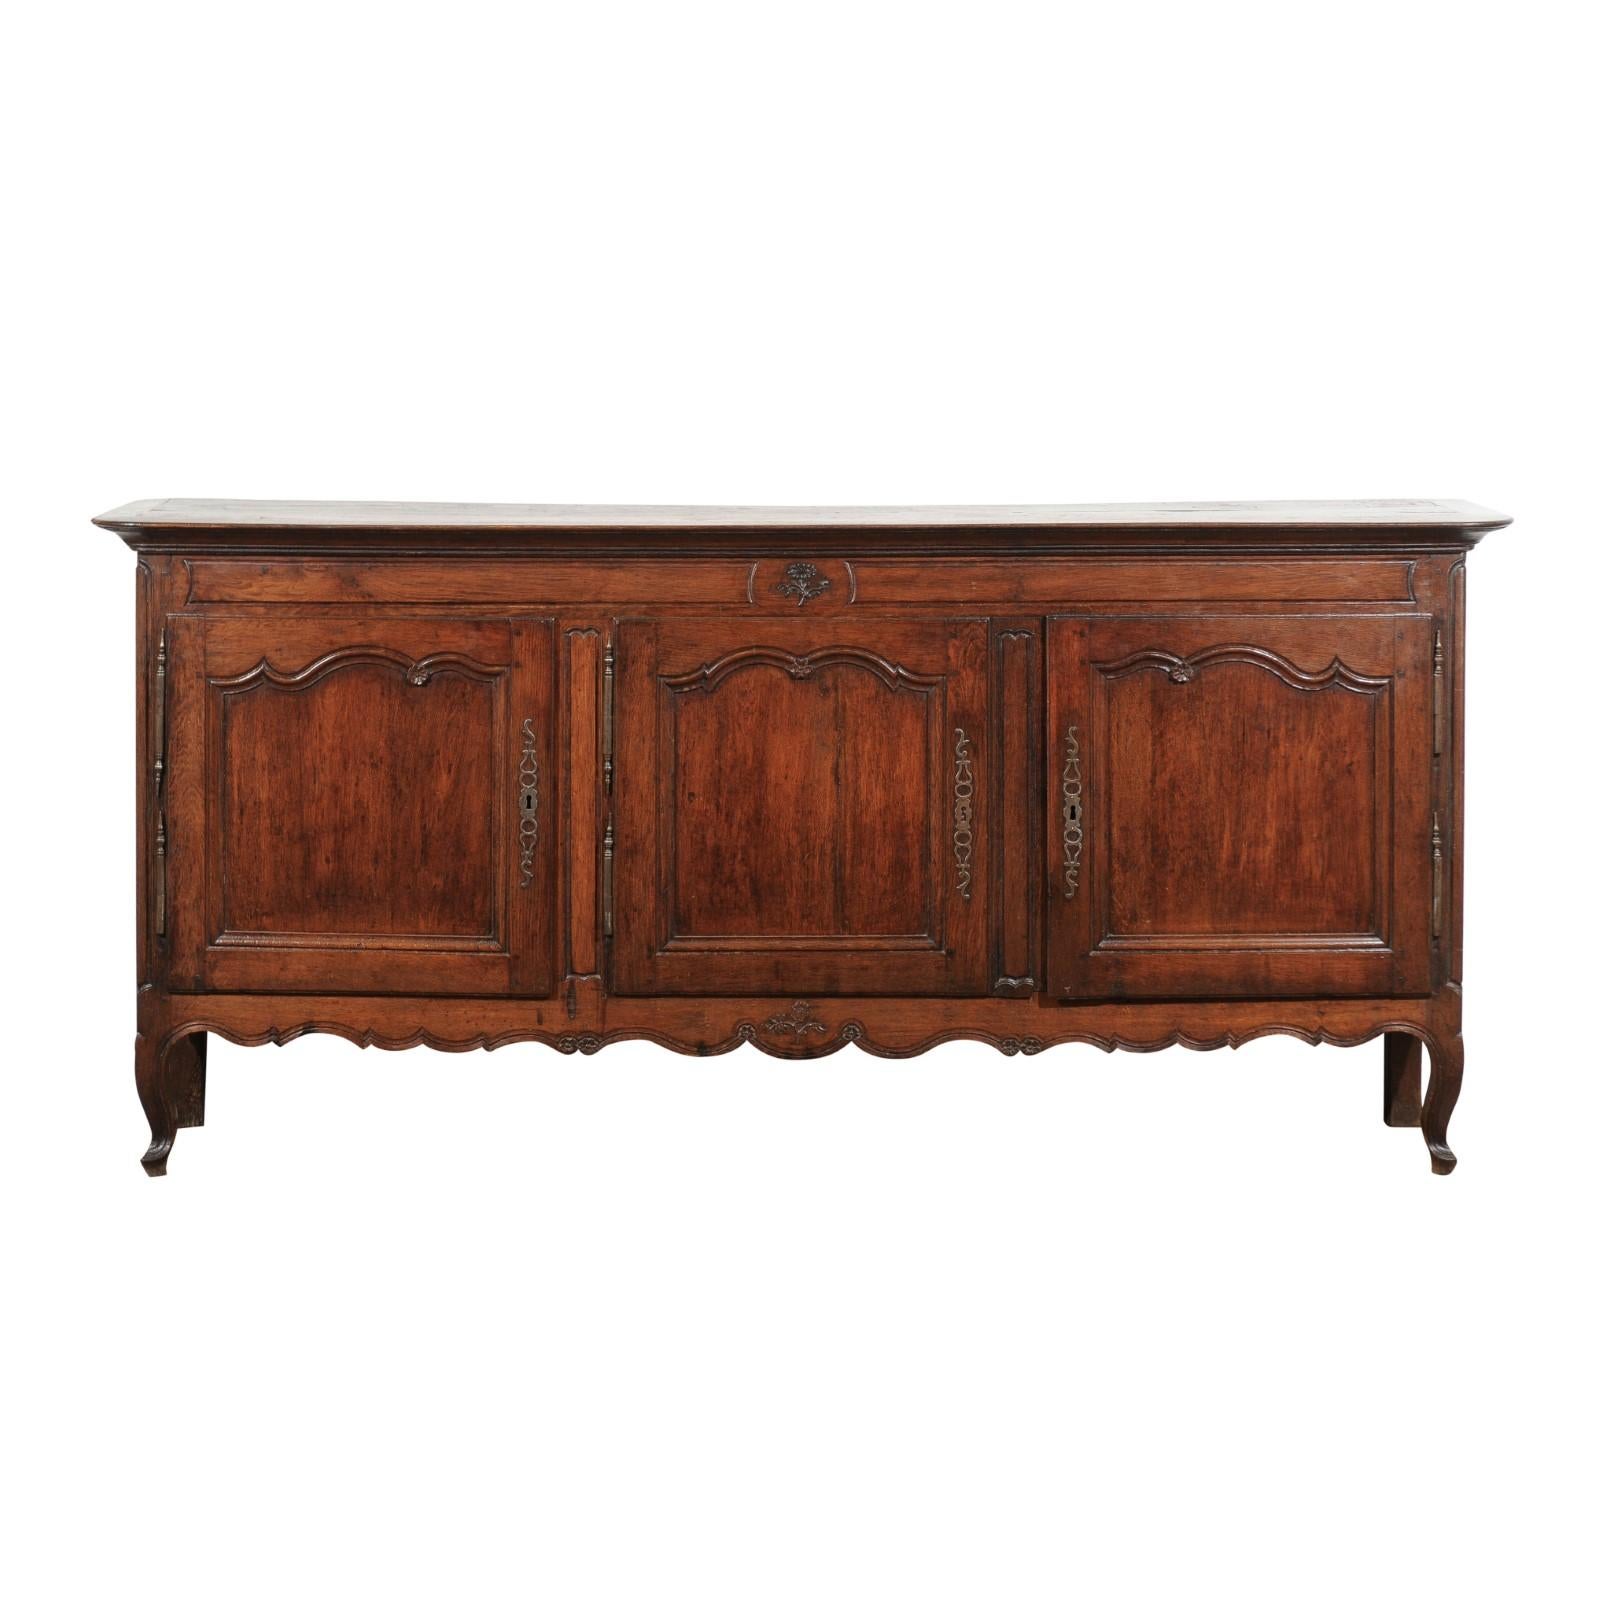 French, 19th Century Louis XV Style Chestnut Enfilade with Original Hardware